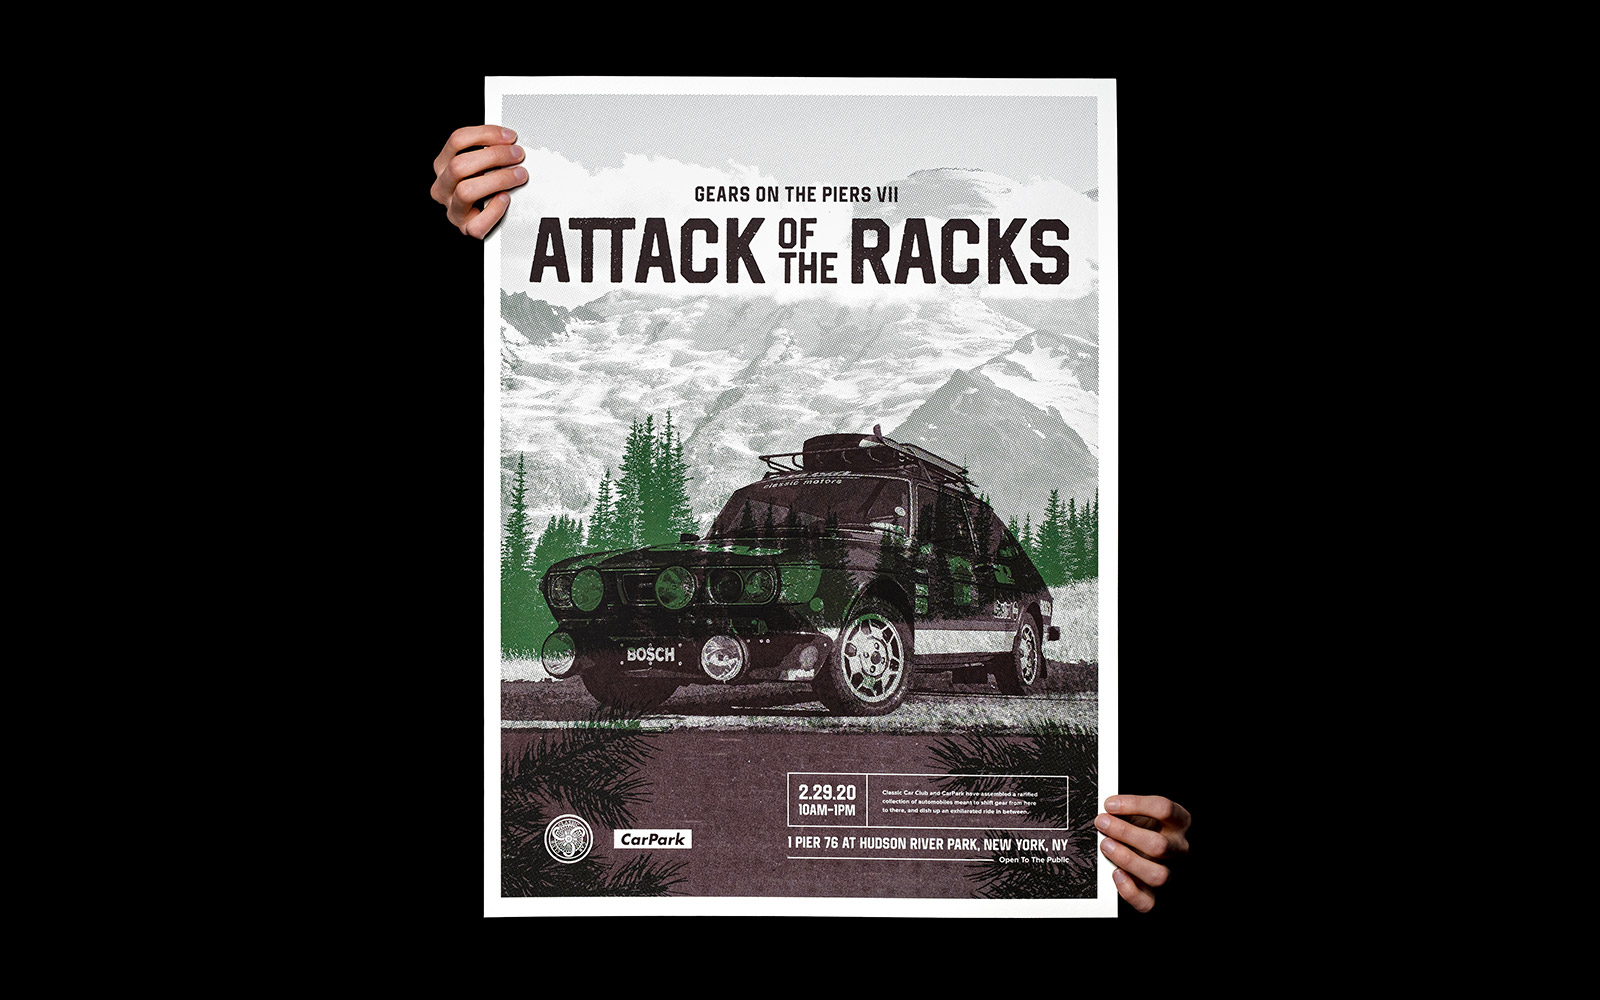 A photograph of the silk screened poster for Gears on the Pier: Attack of the Racks